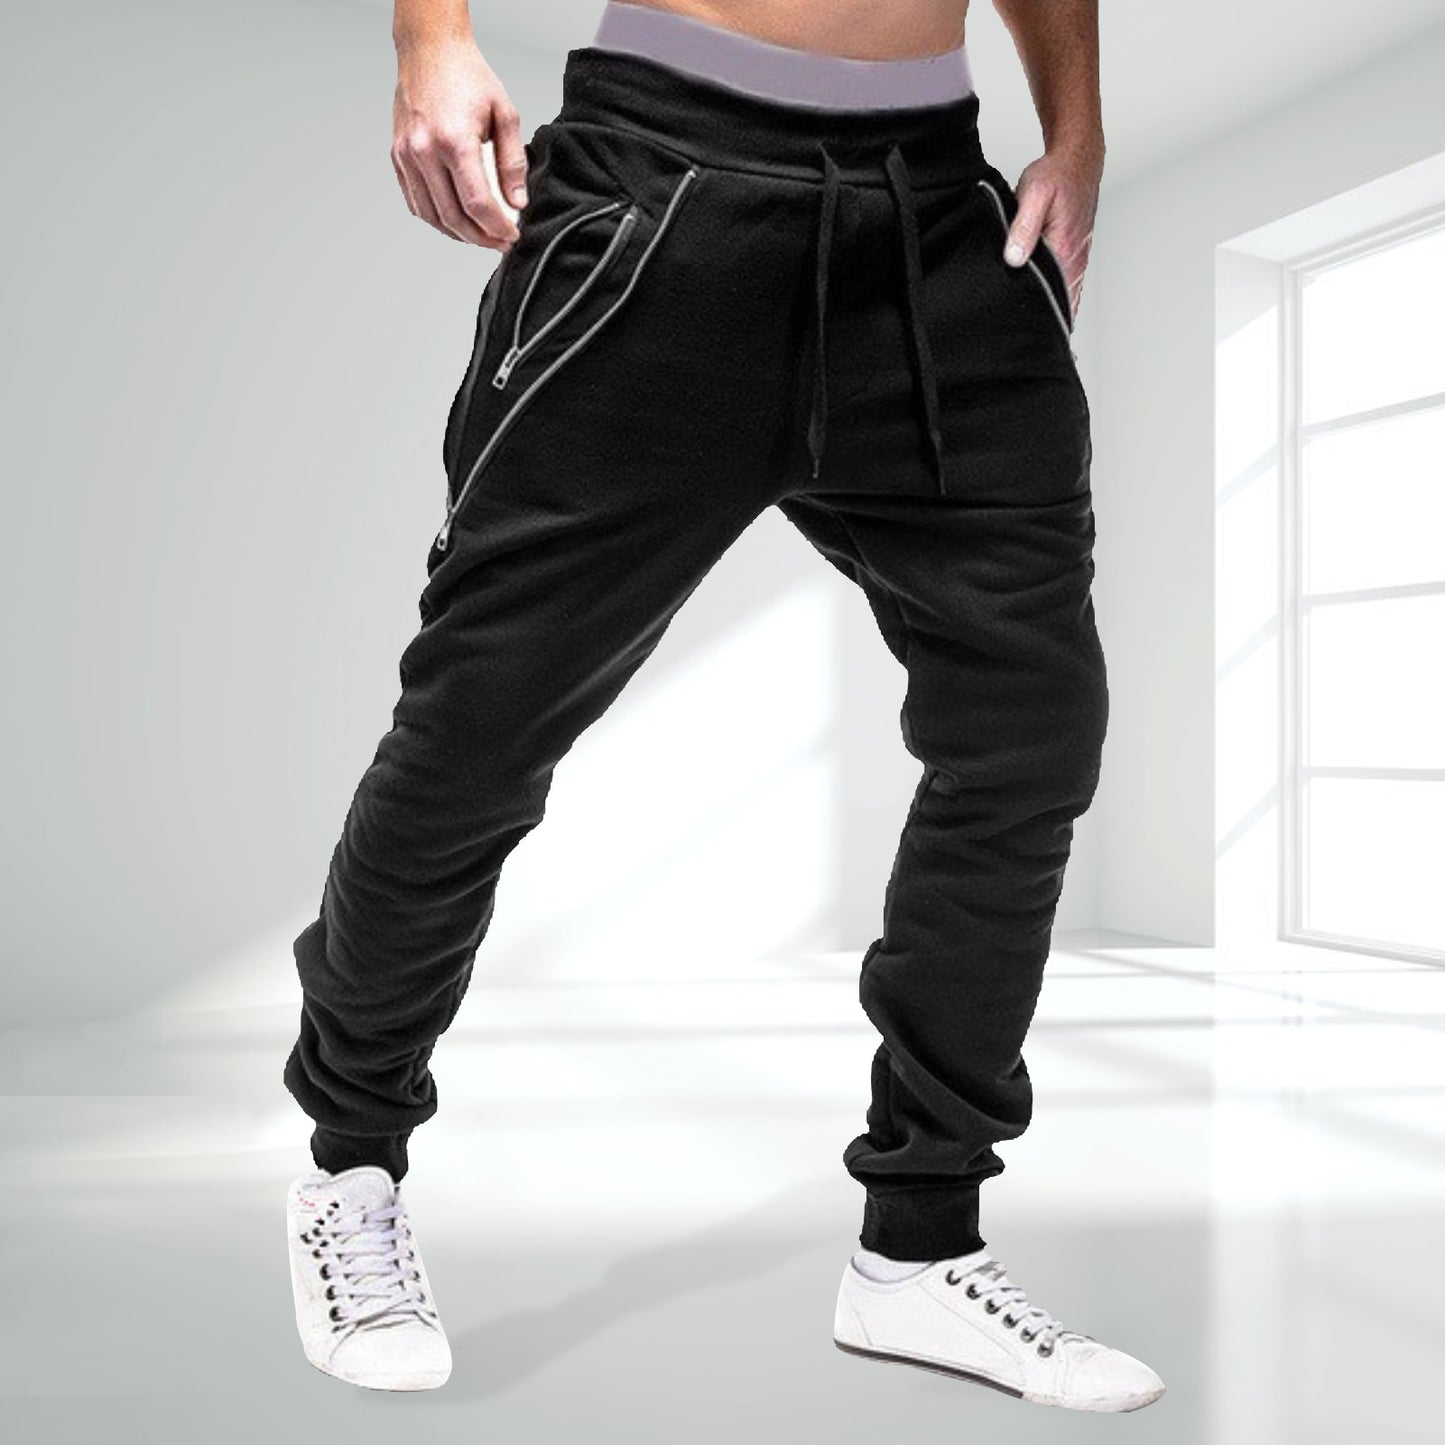 Drawstring Zipper Ankle Tied Sweatpants - Forever Growth 